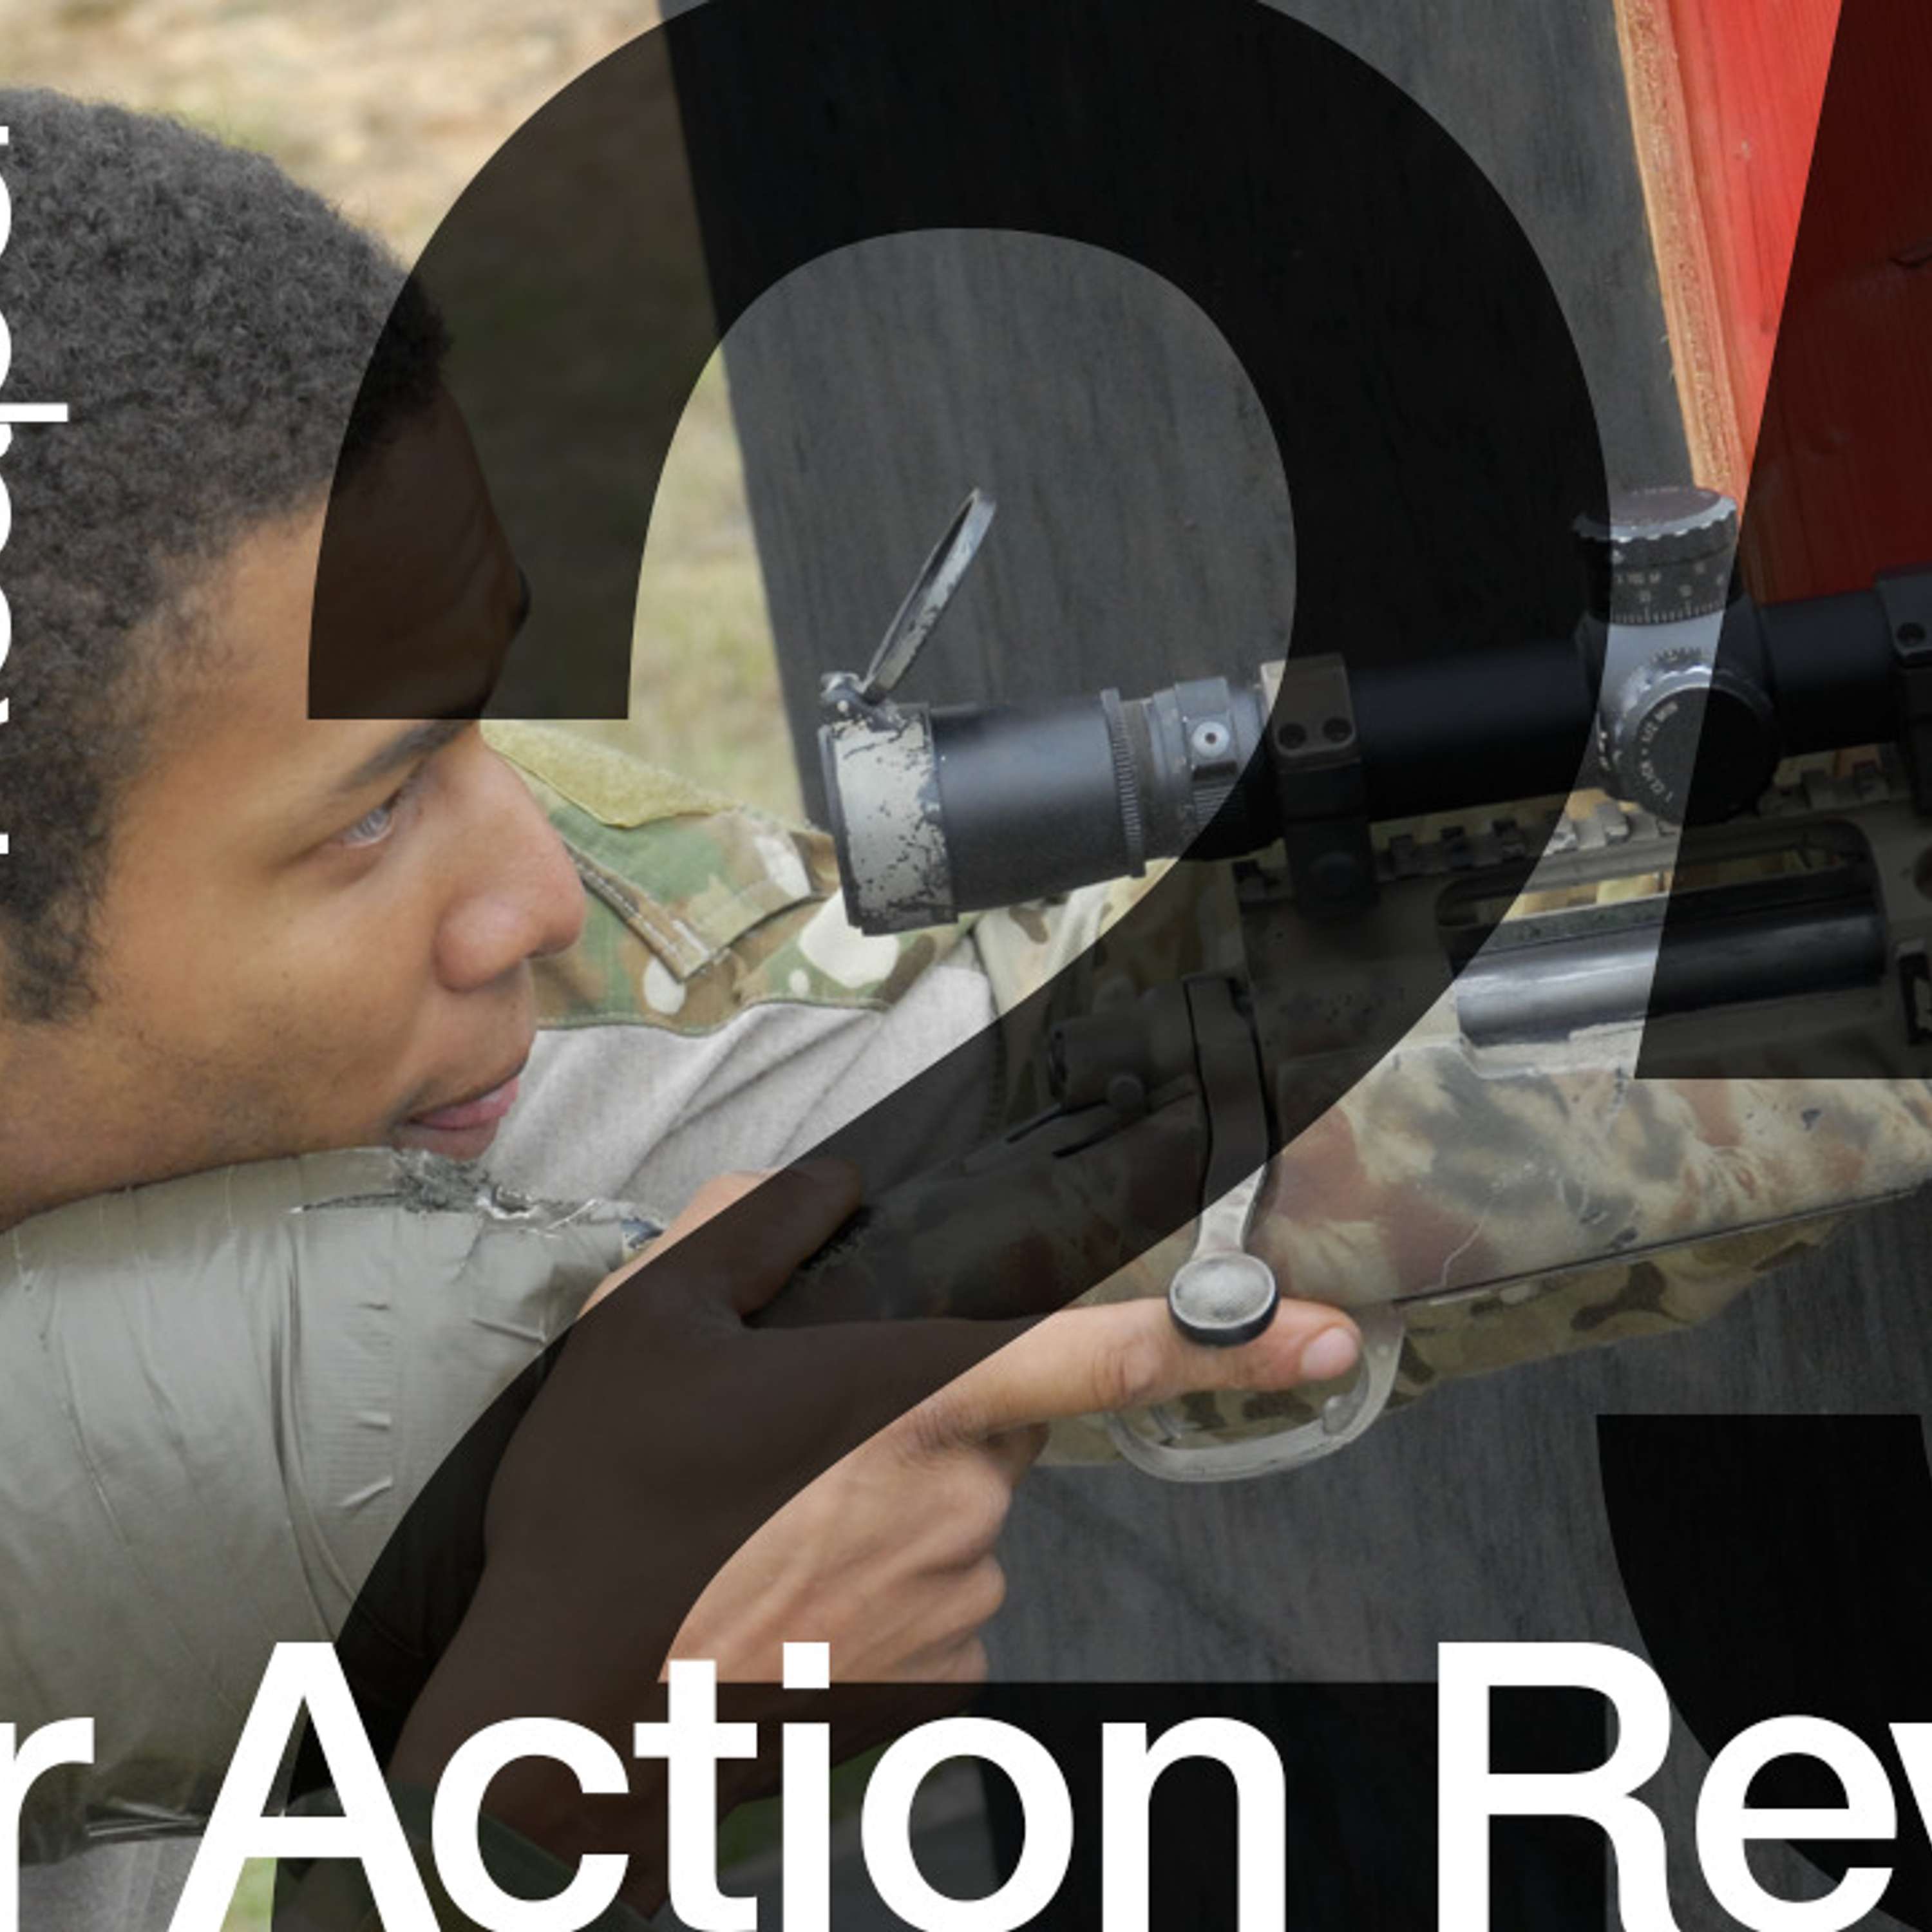 The After Action Review Episode 25: Army Ranger and Sniper Nick ”Reaper” Irving